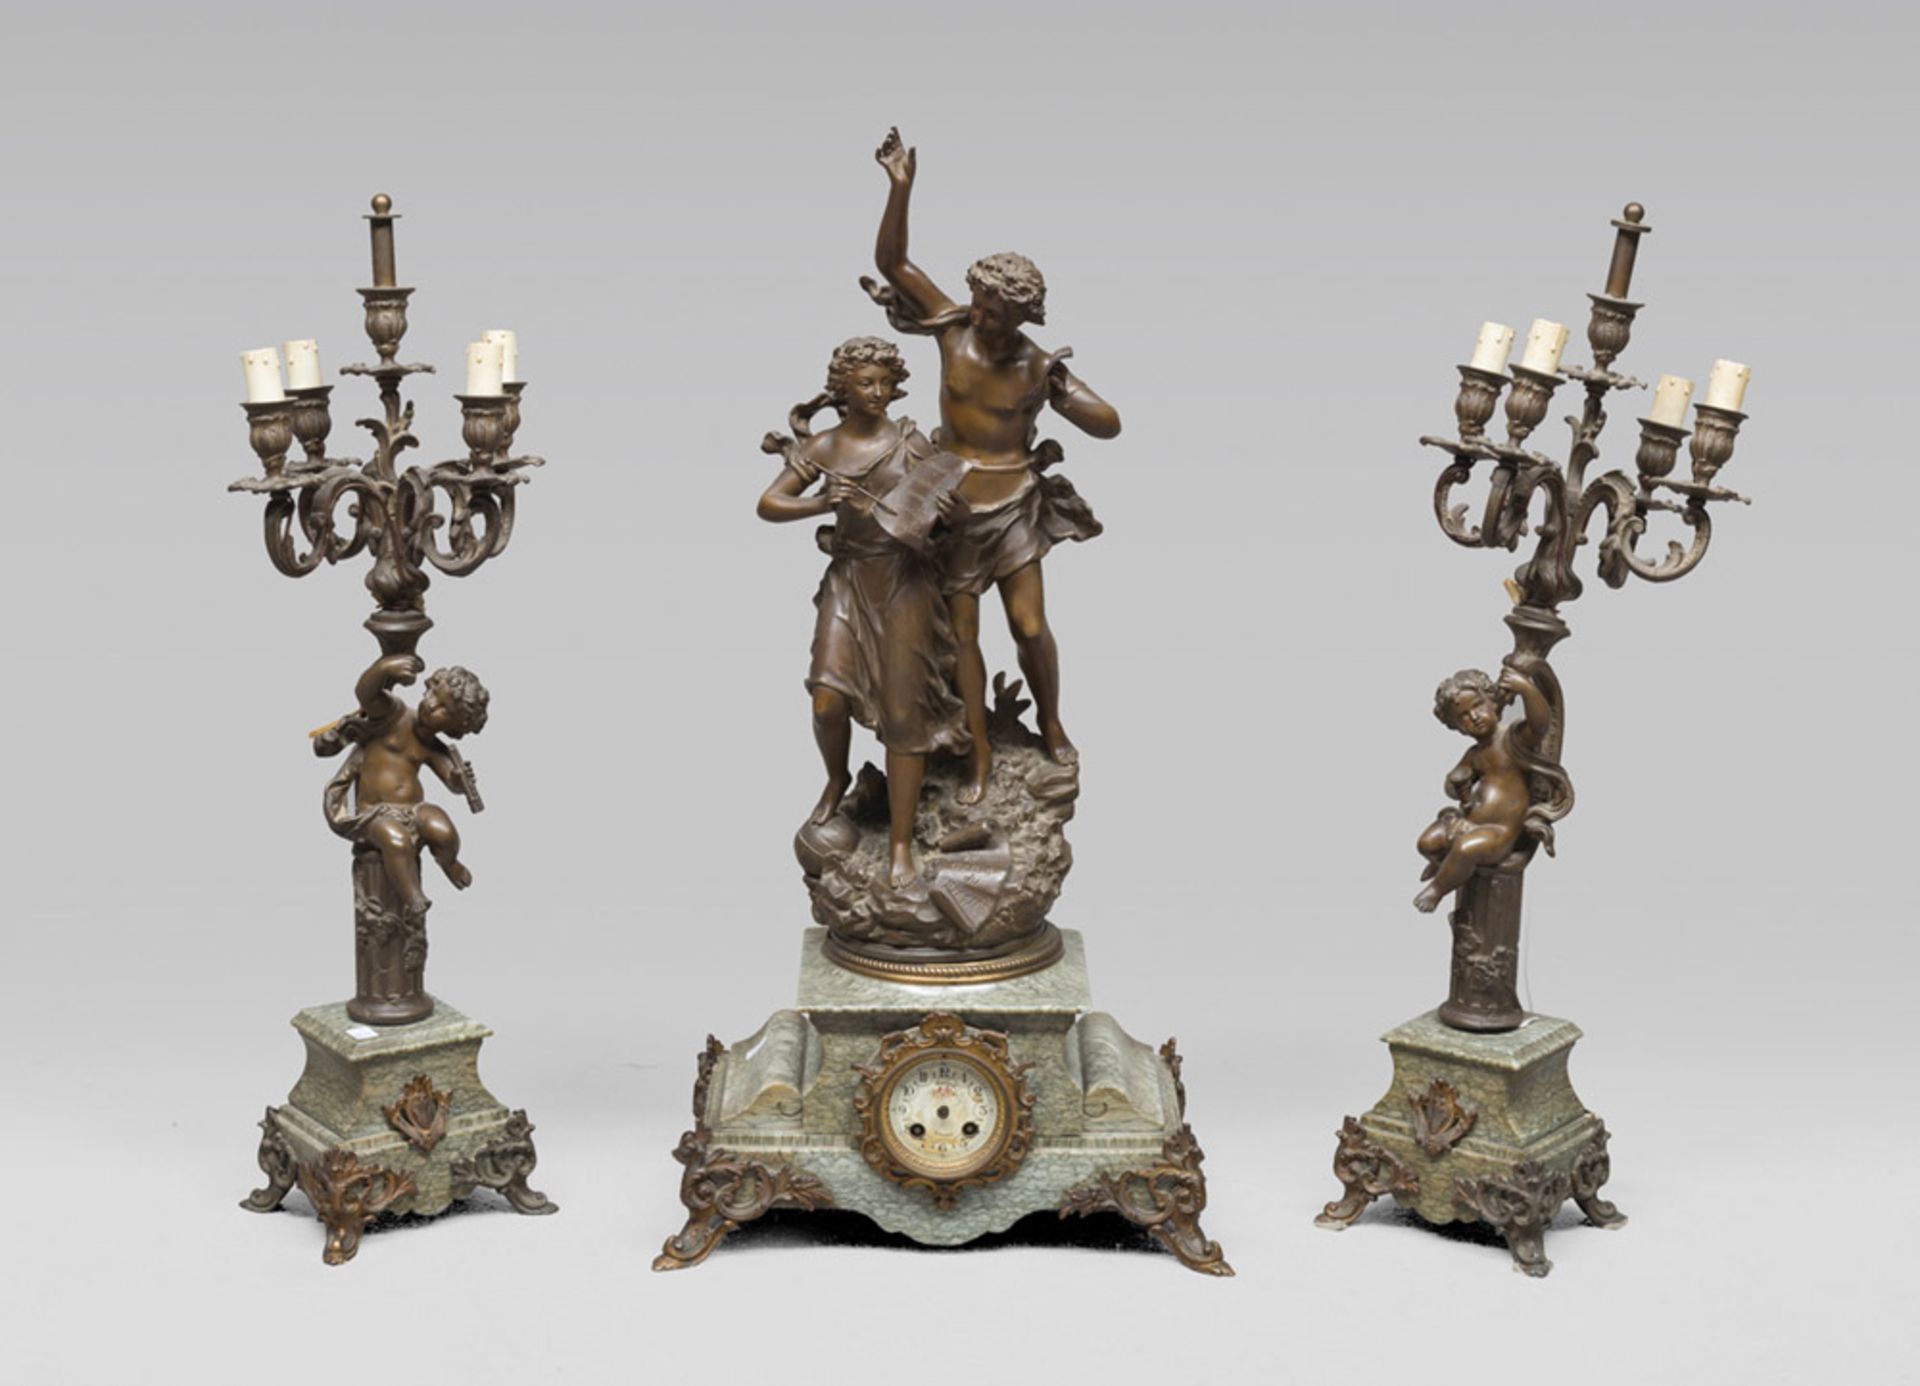 BURNISHED METAL AND MARBLE MANTEL TRYPTIC CLOCK, FRANCE EARLY 20TH CENTURY